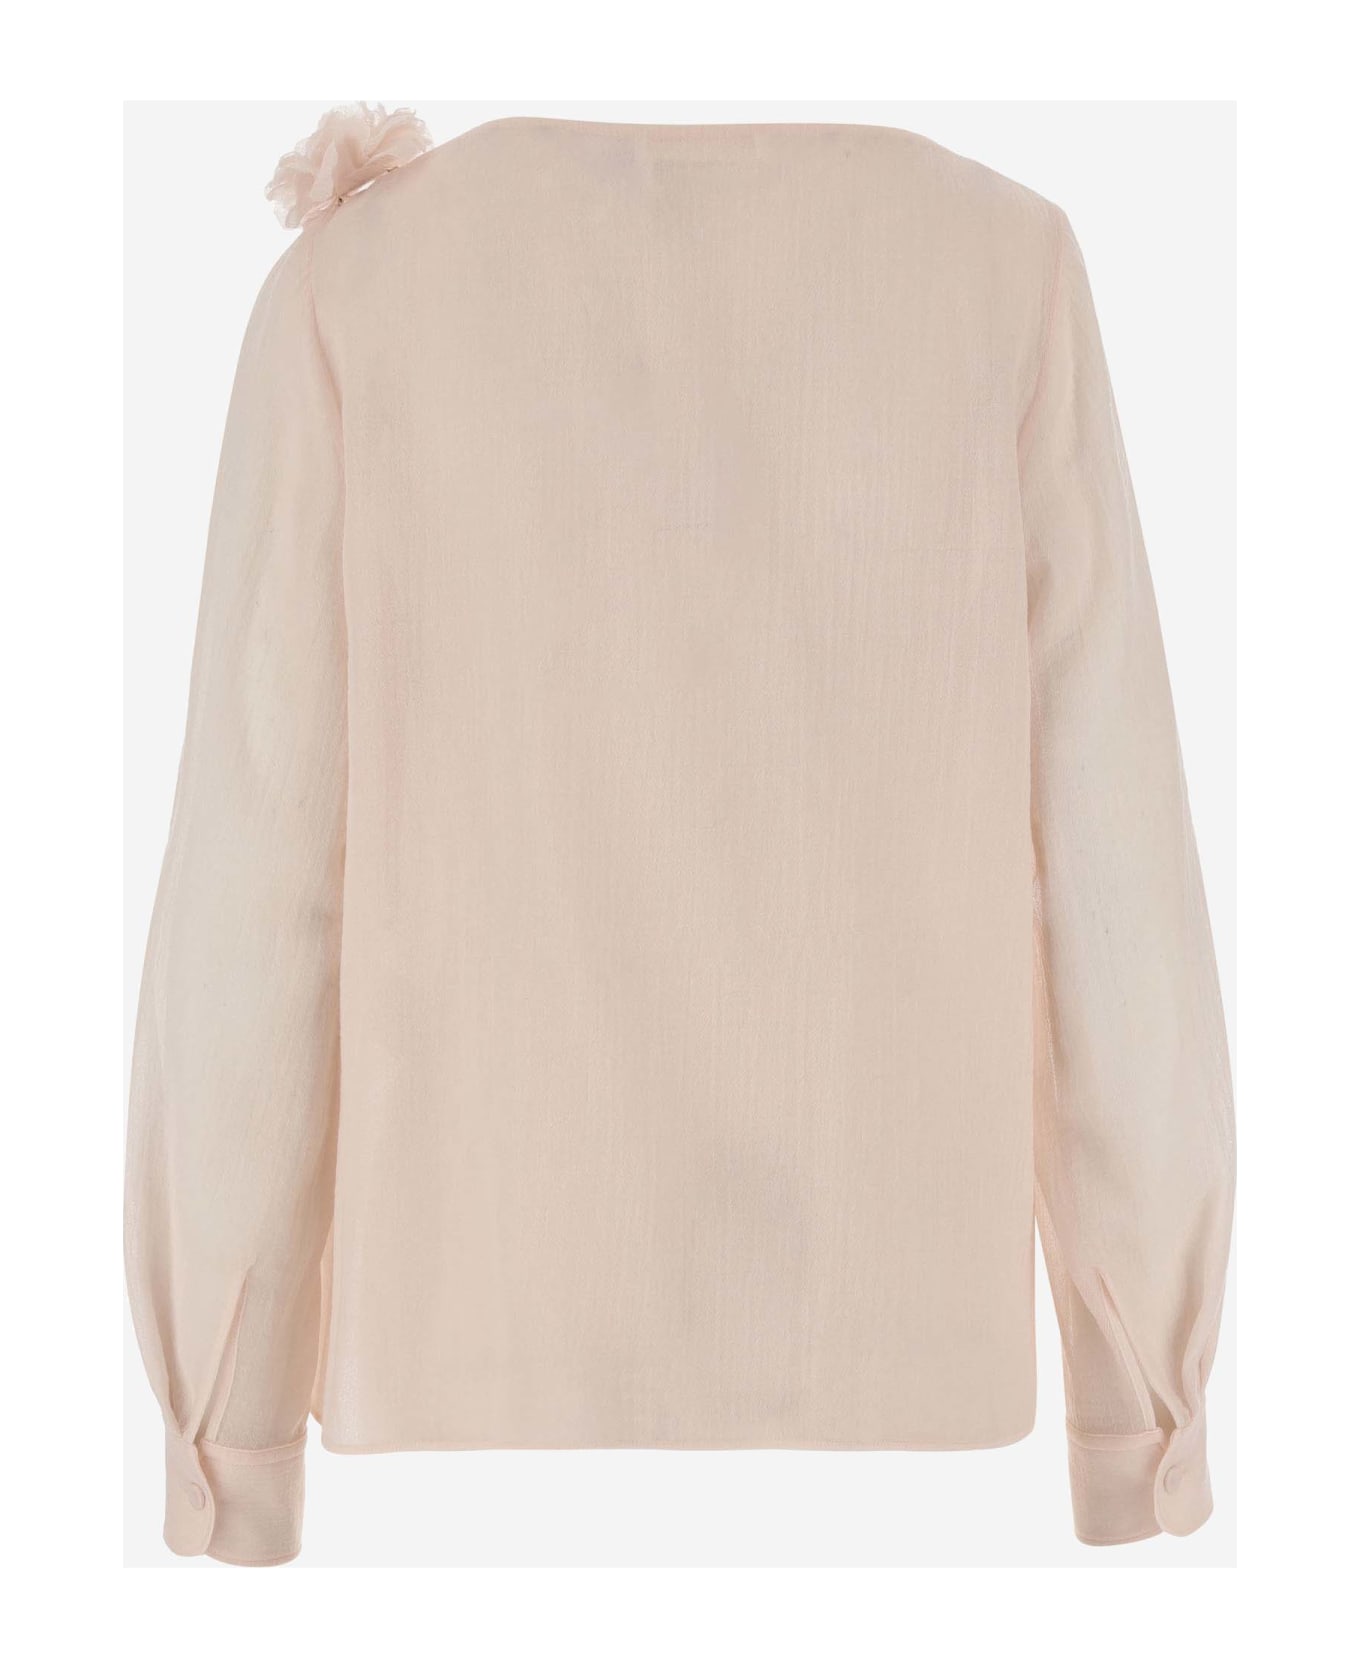 Chloé Draped Top With Boat Neckline - Pink タンクトップ